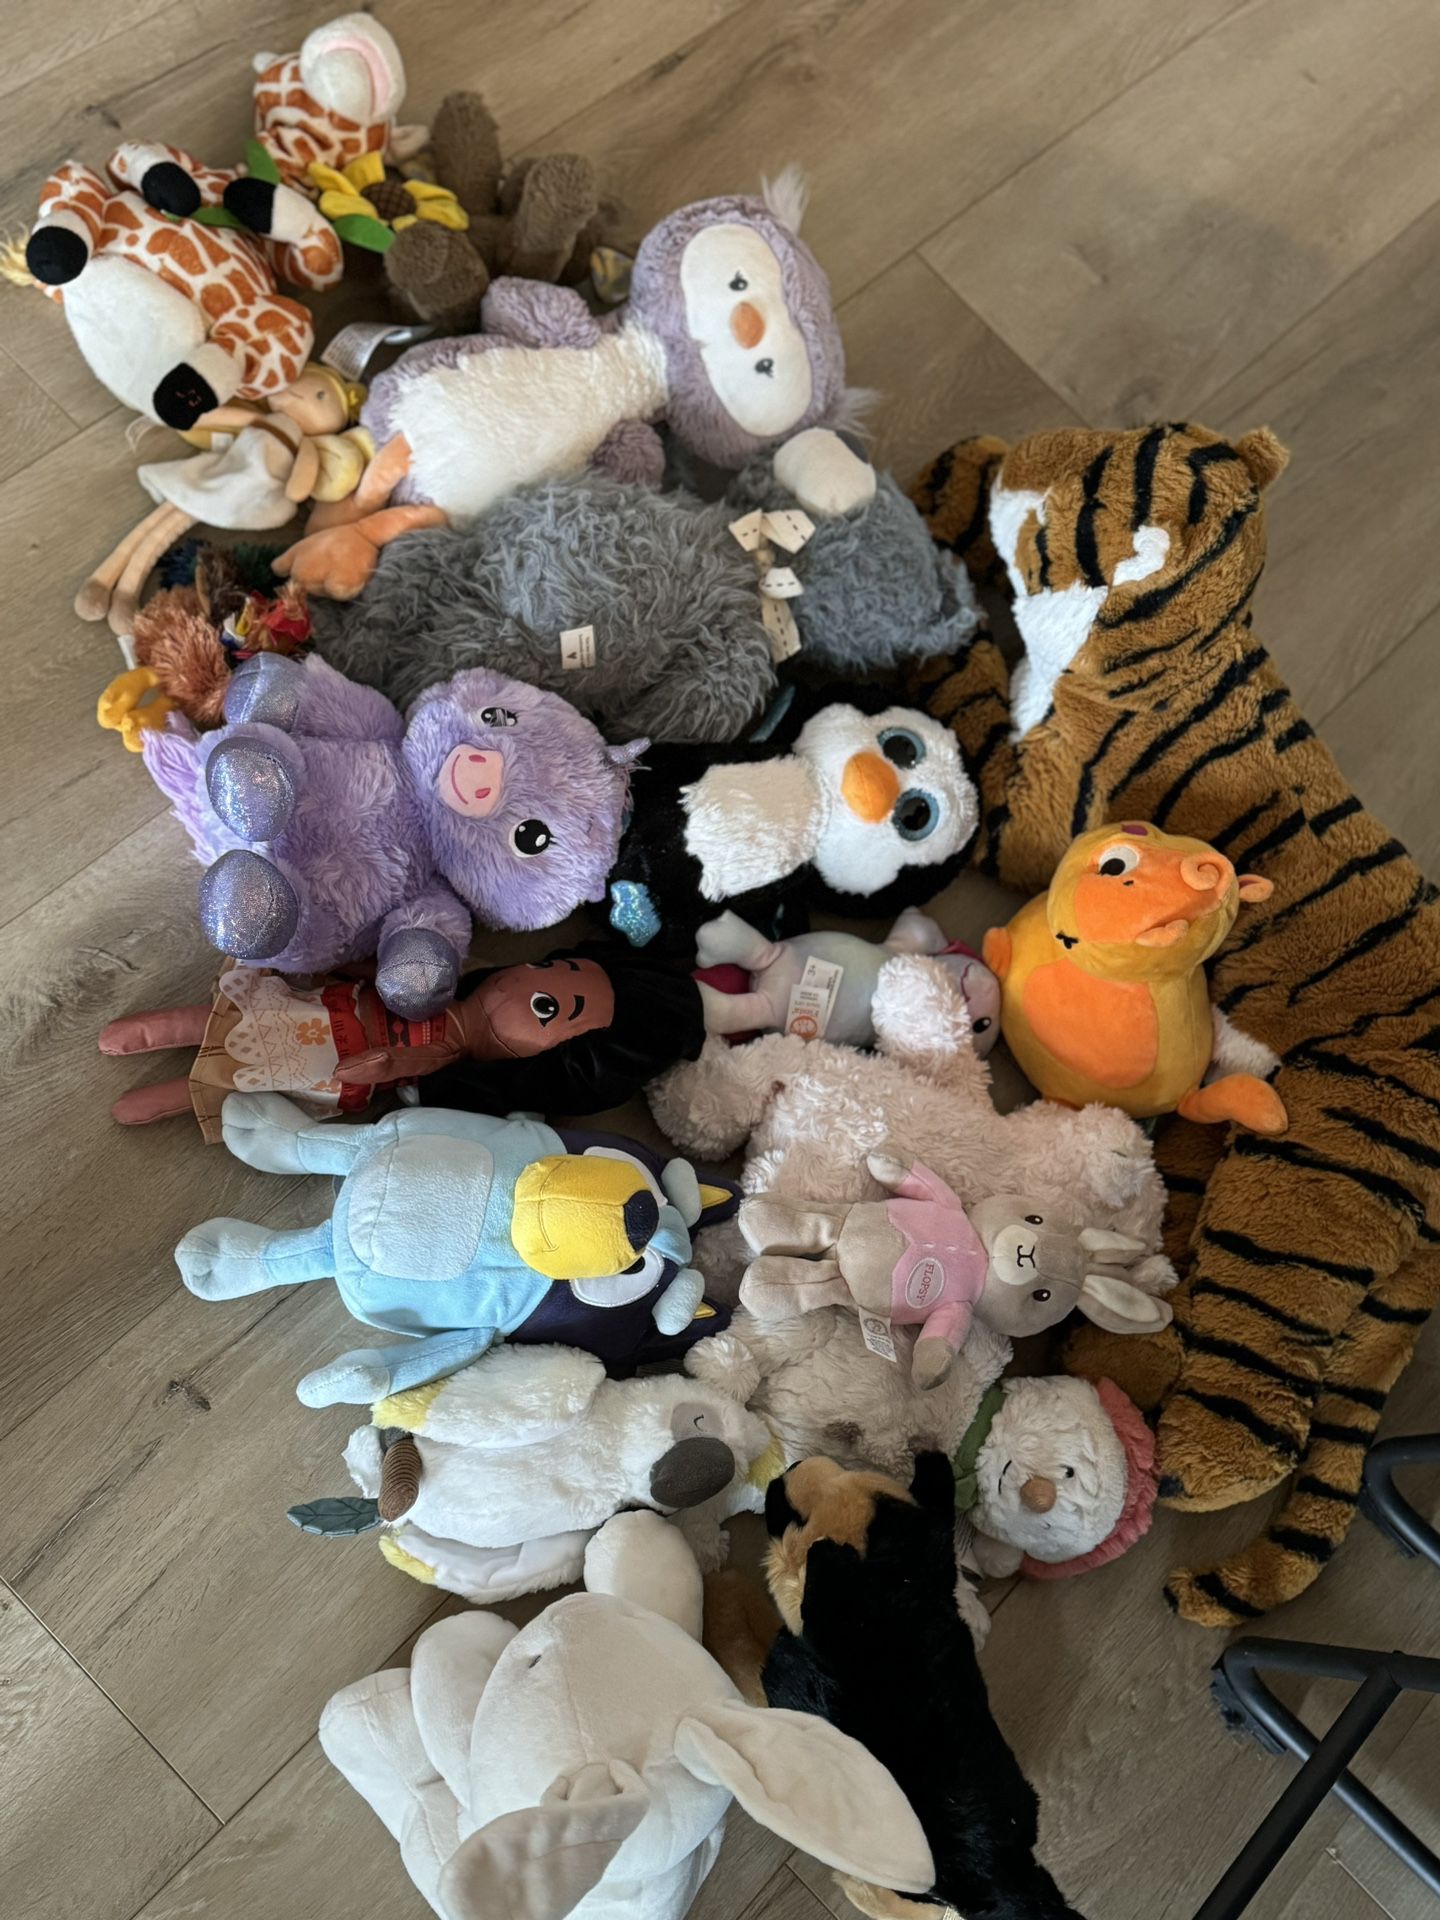 Bundle Of Stuffed Animals In Like-New condition 